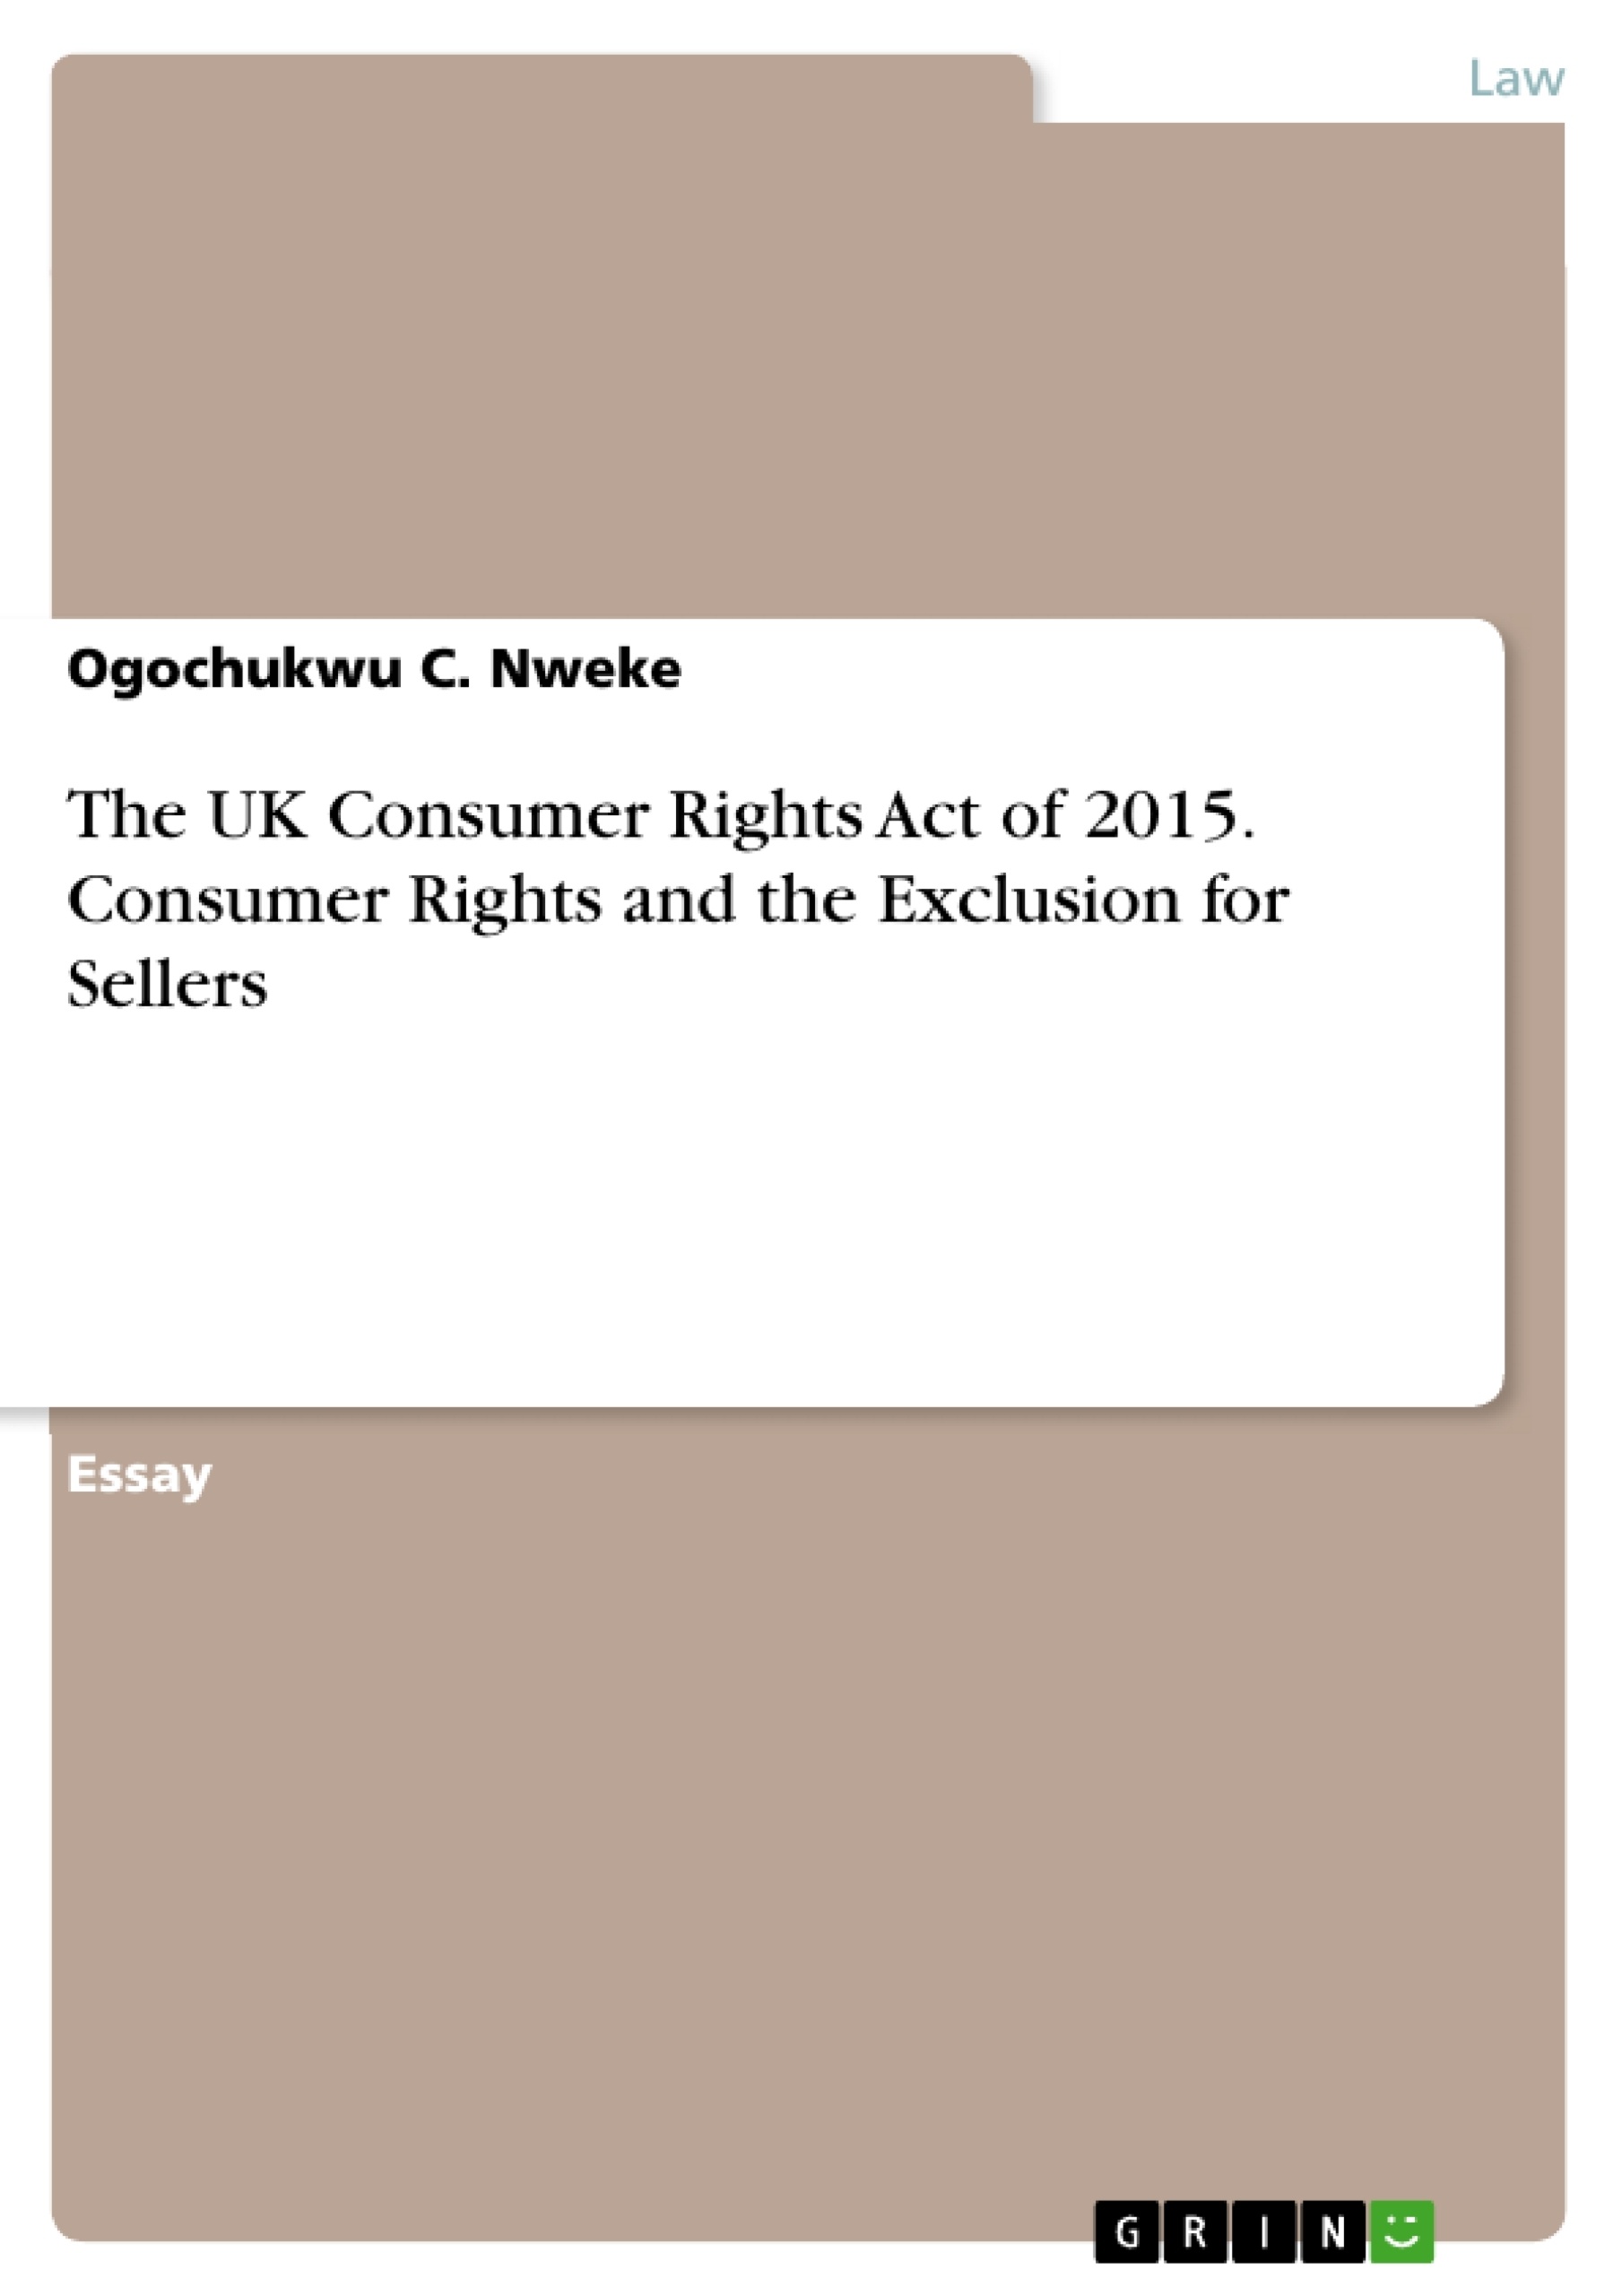 Titre: The UK Consumer Rights Act of 2015. Consumer Rights and the Exclusion for Sellers